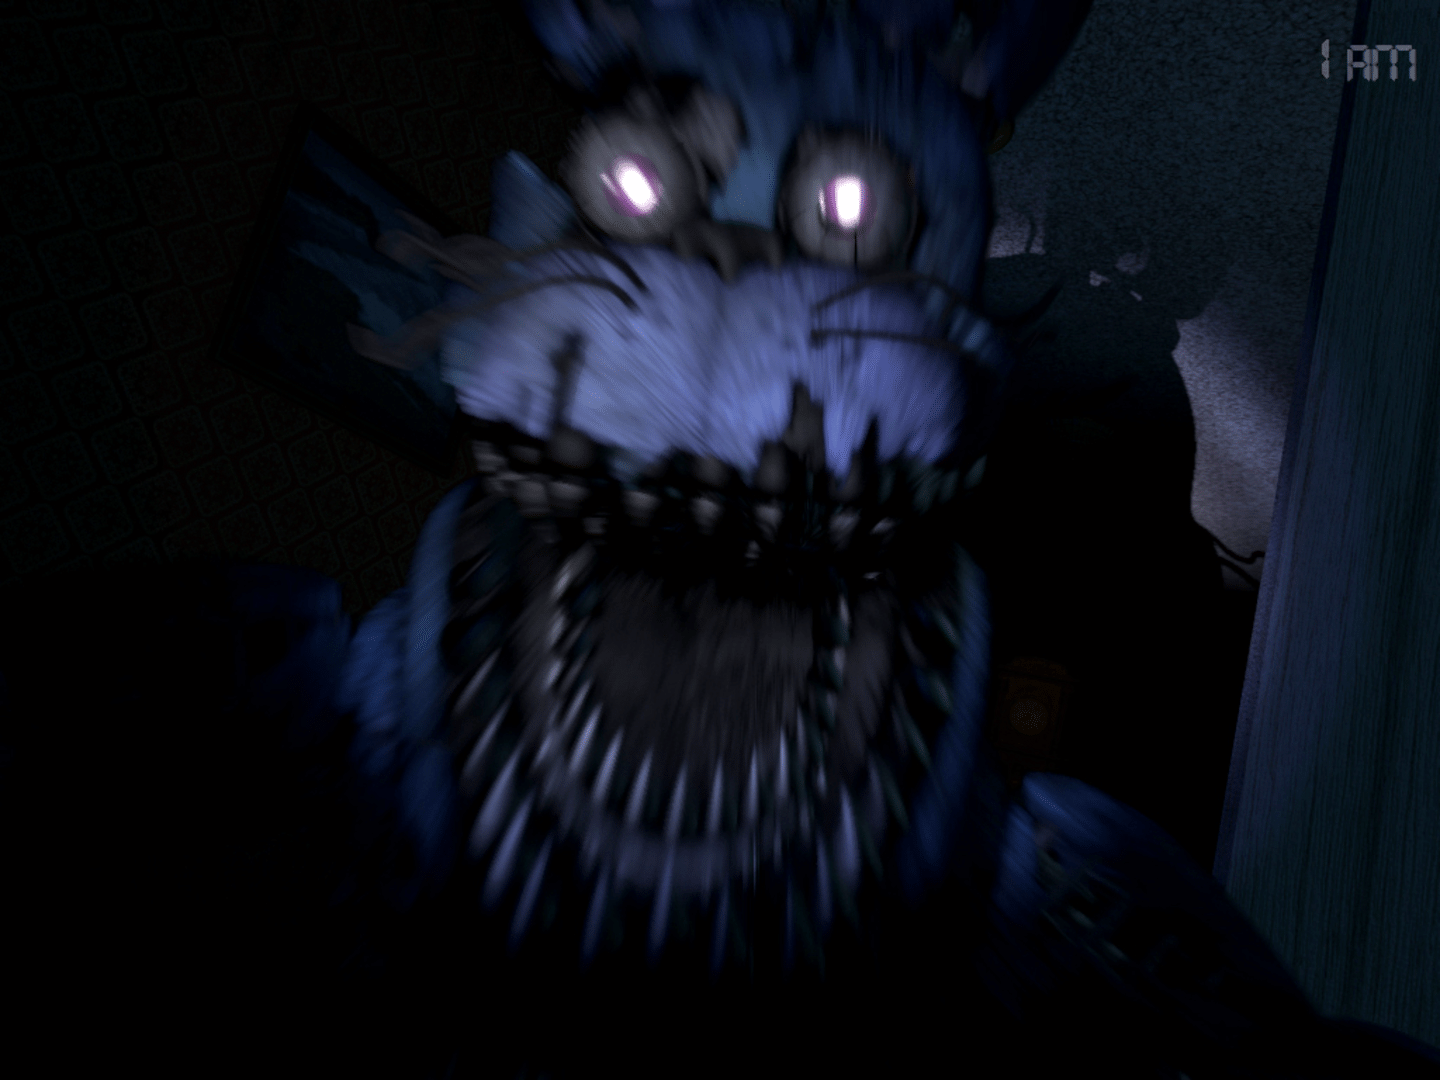 Five Nights at Freddy's 4: The Final Chapter announced